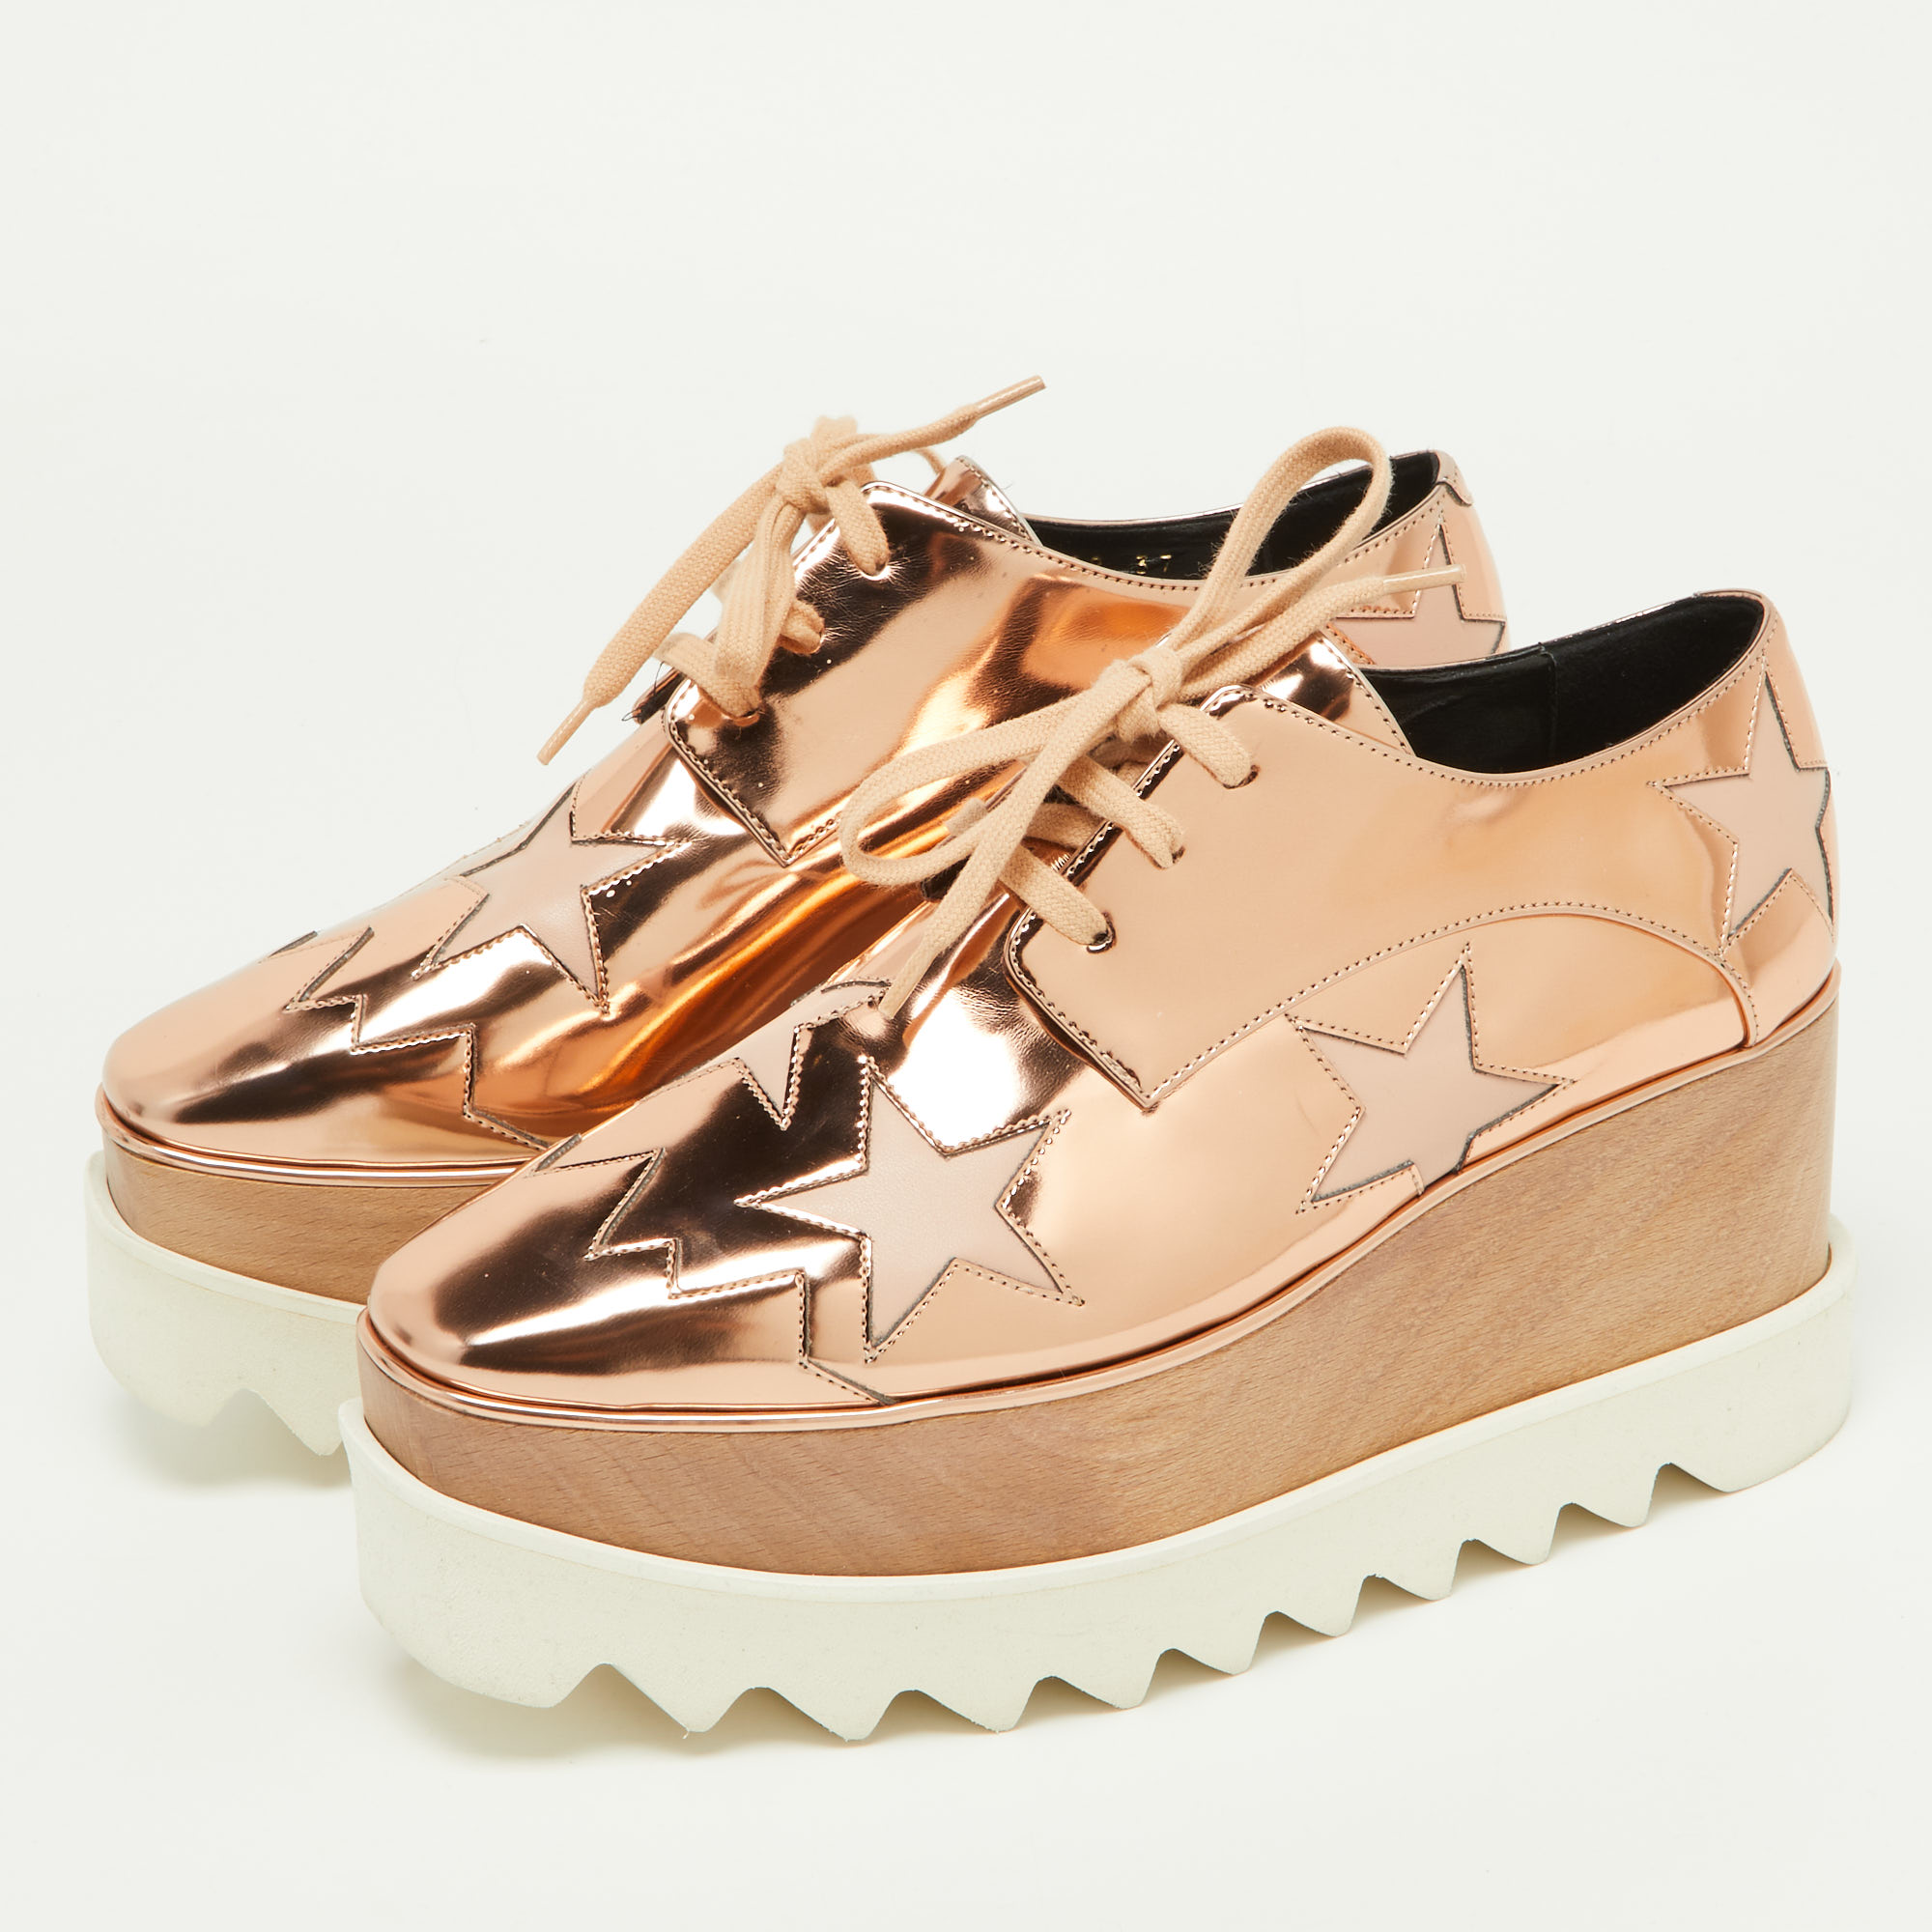 

Stella McCartney Metallic Rose Gold Faux Patent Leather Elyse Star Platform Lace Up Sneakers Size